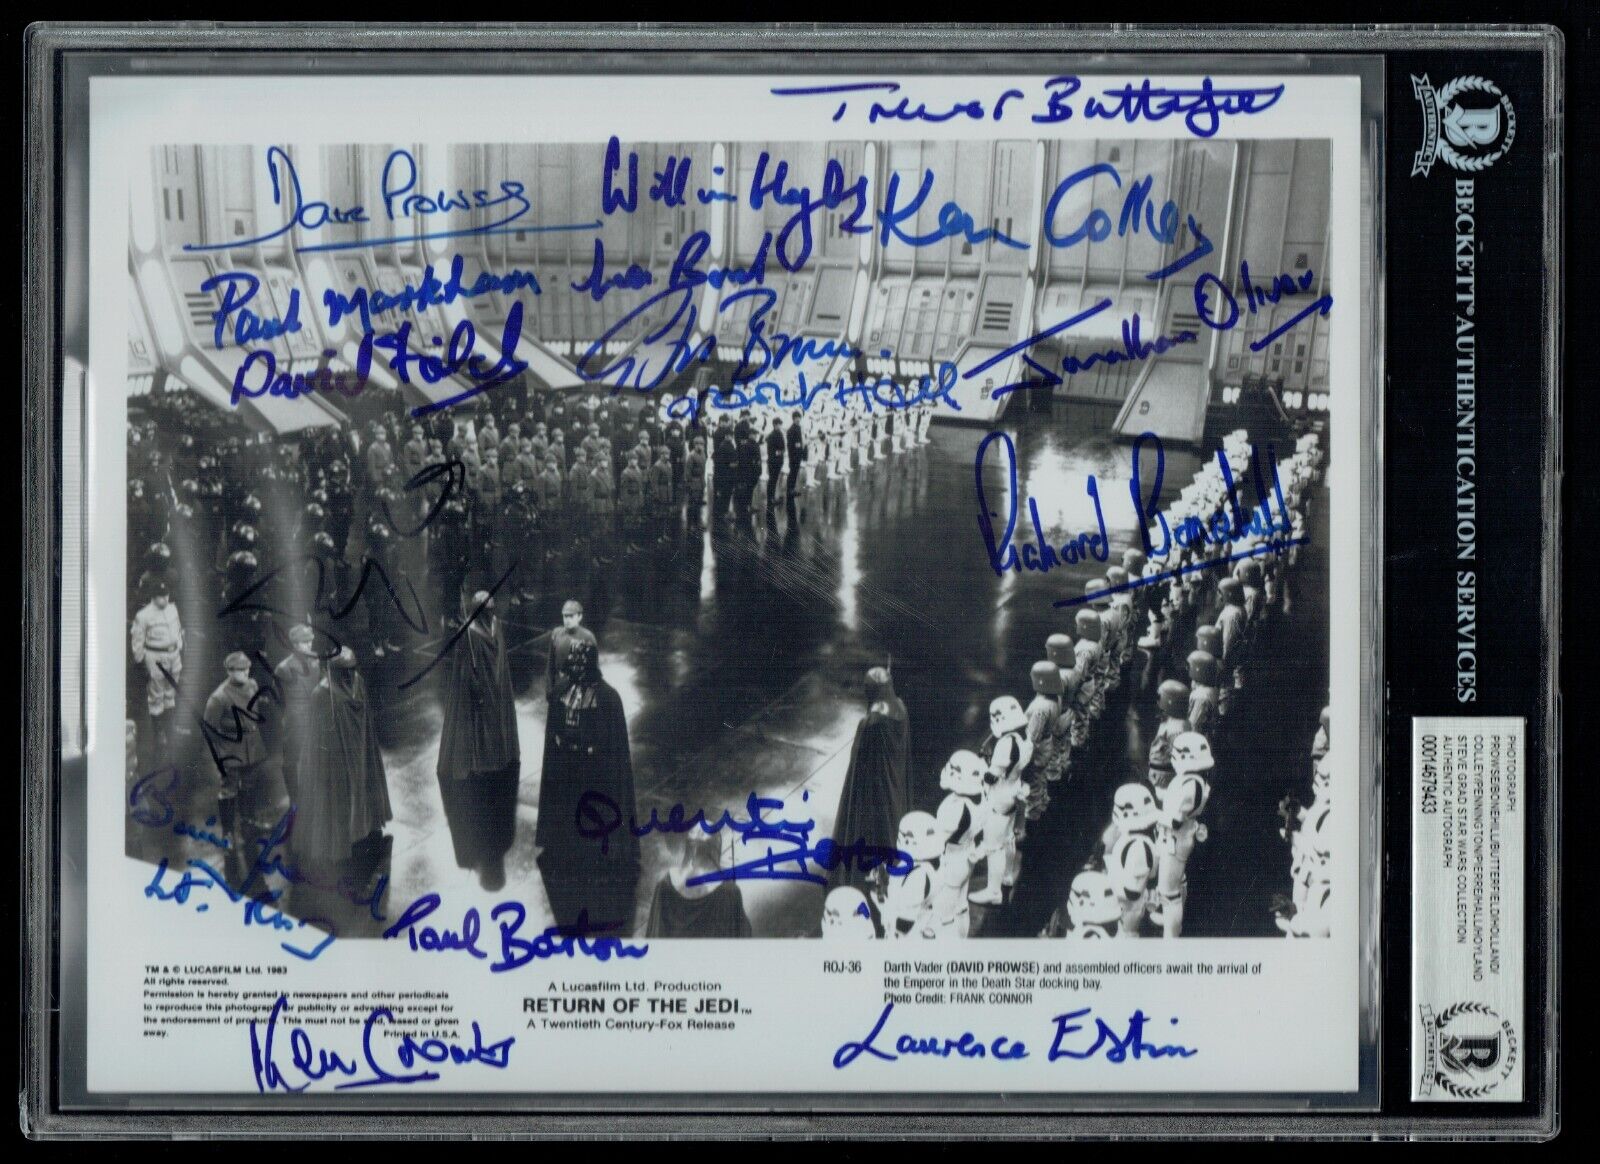 Dave Prowse Darth Vader +15 Others signed autograph 8x10 STAR WARS Photo BAS